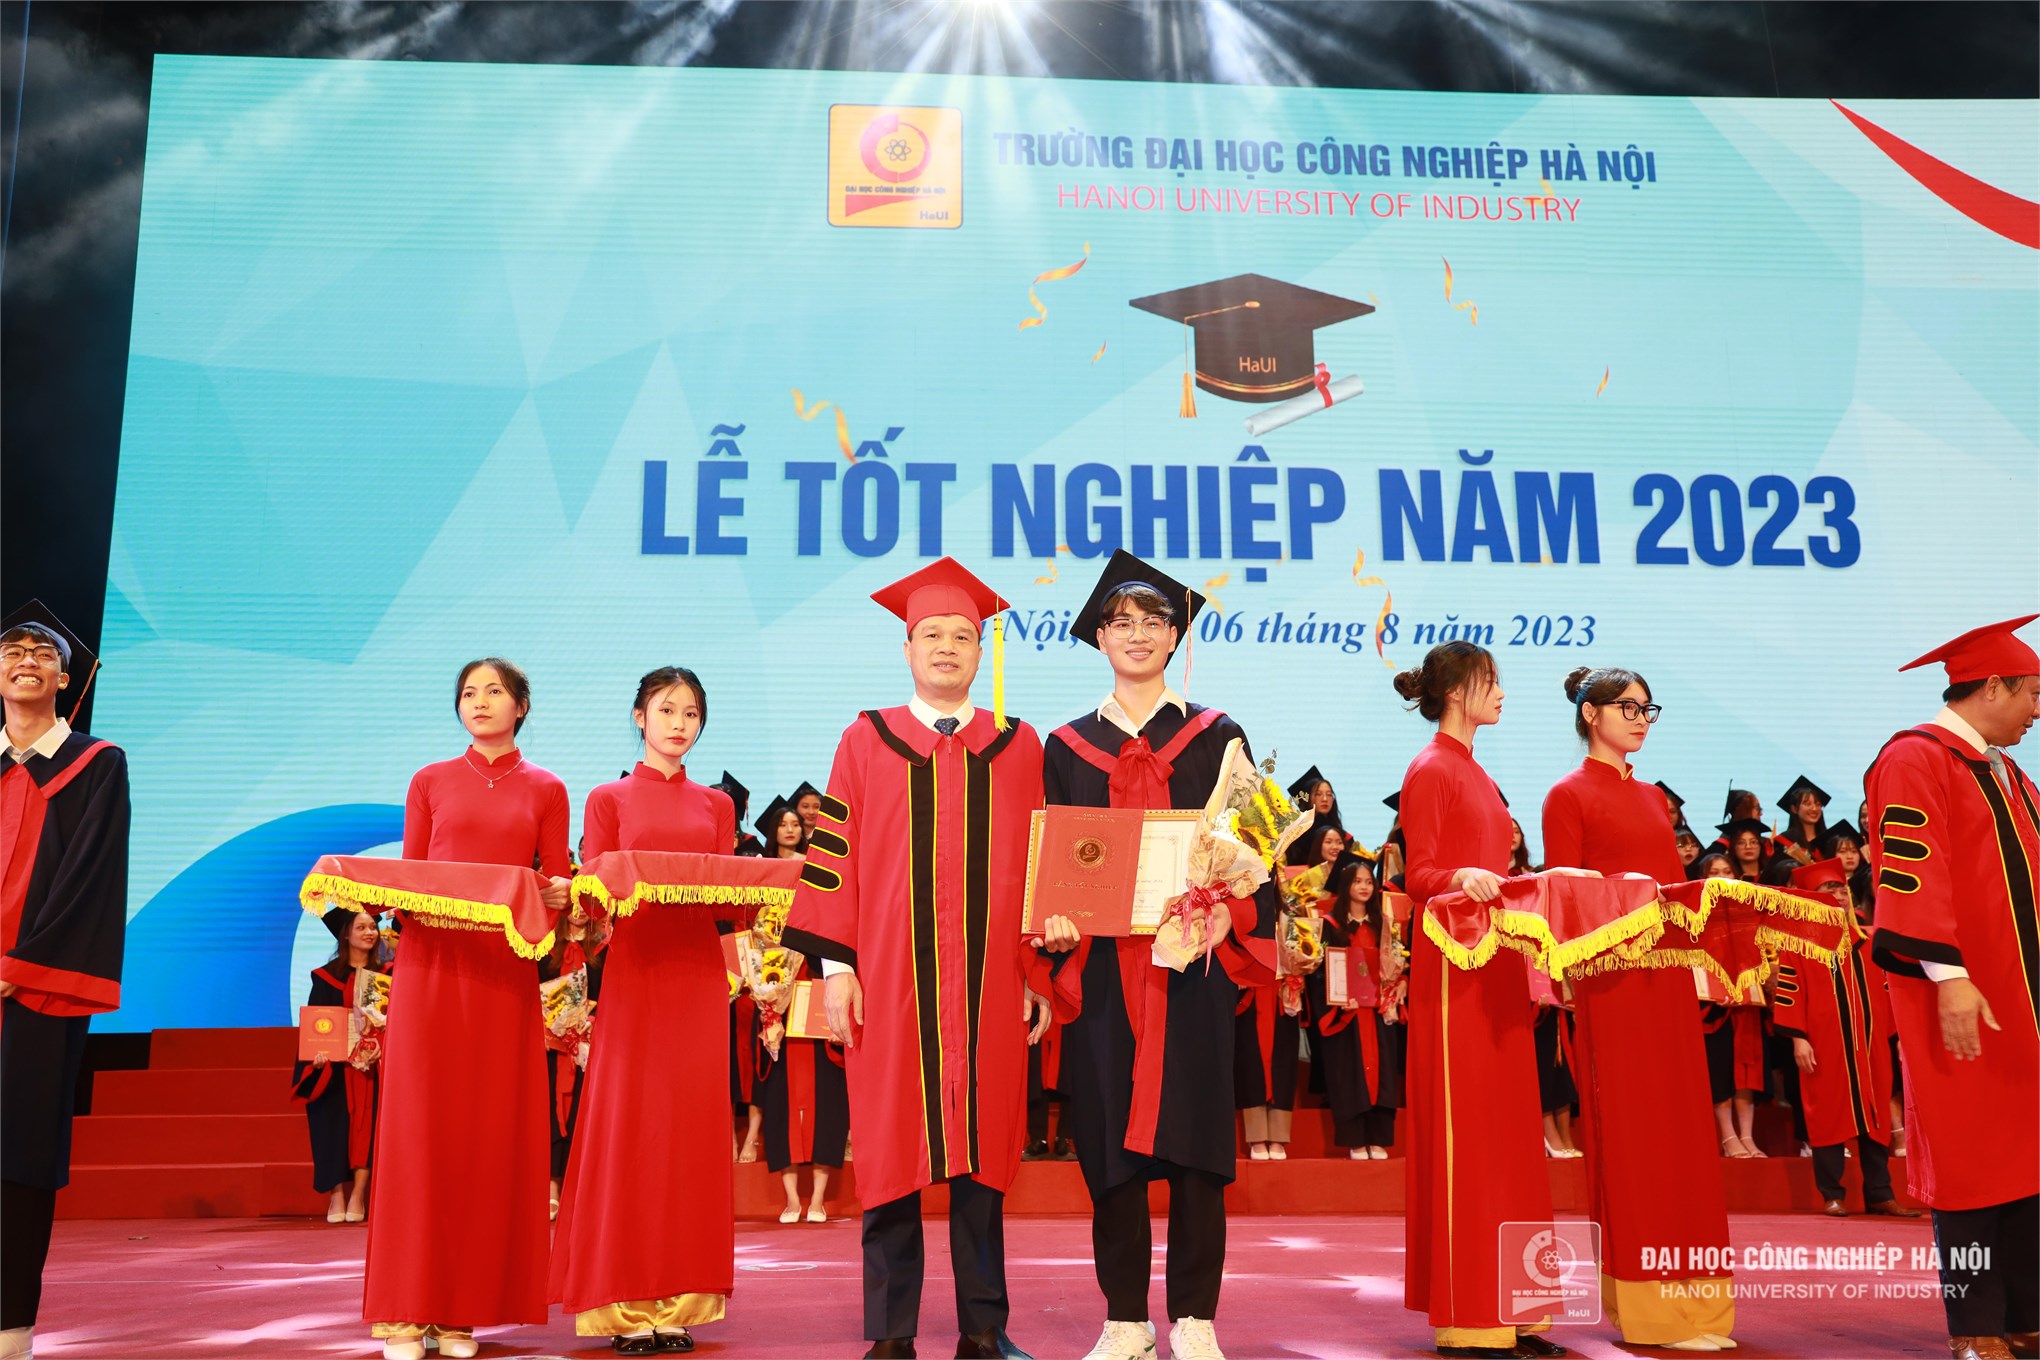 The university leaders awarded certificates of merit and flowers to 162 typical new bachelor